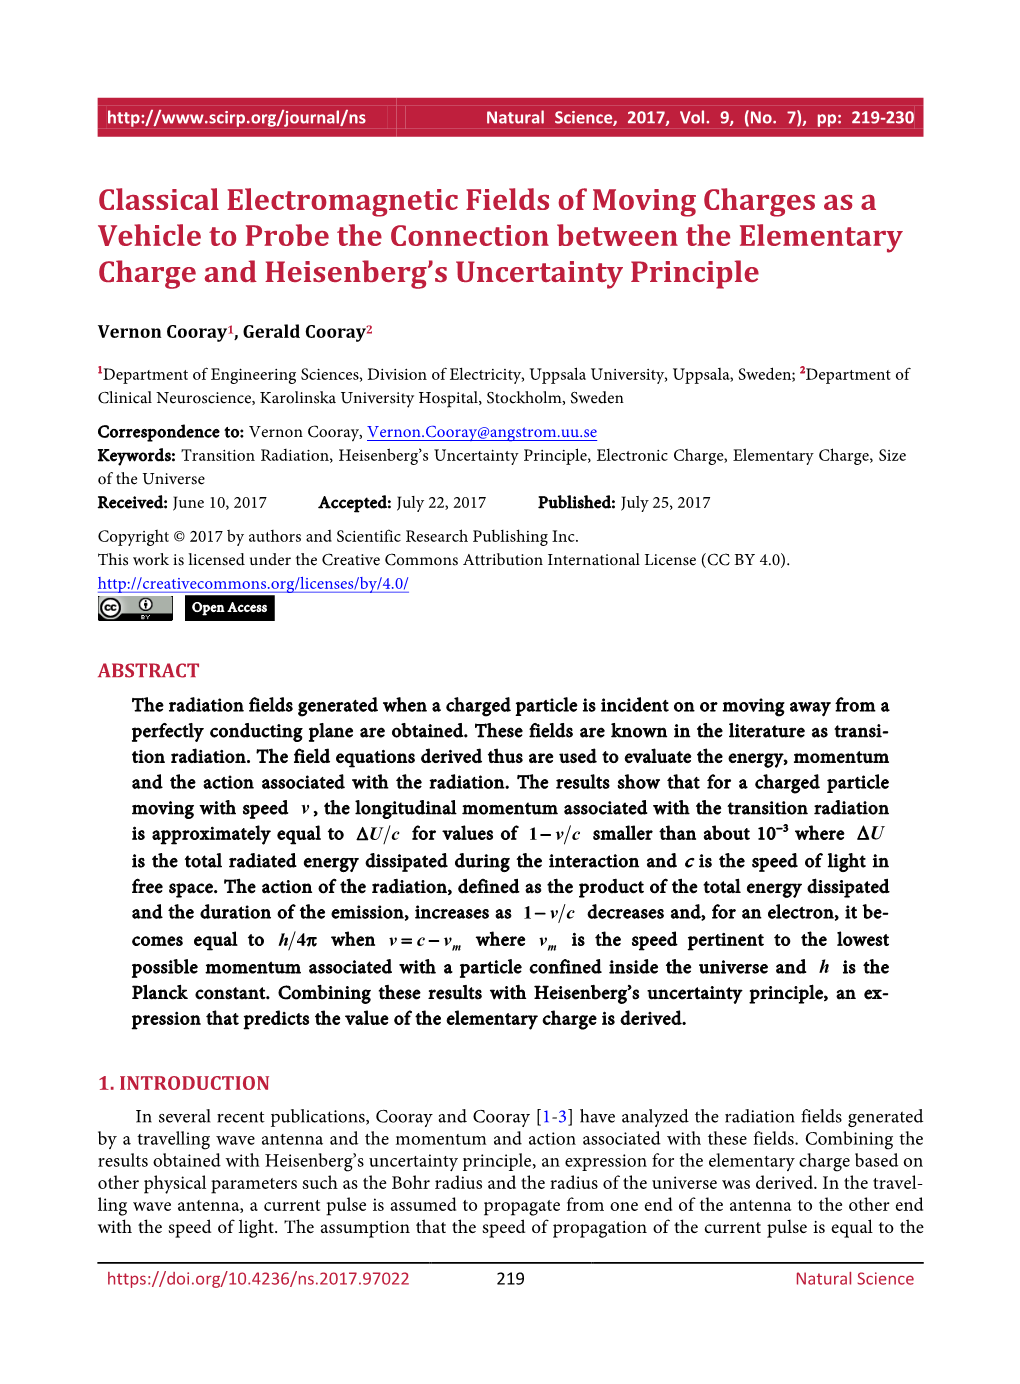 Classical Electromagnetic Fields of Moving Charges As a Vehicle to Probe the Connection Between the Elementary Charge and Heisenberg’S Uncertainty Principle